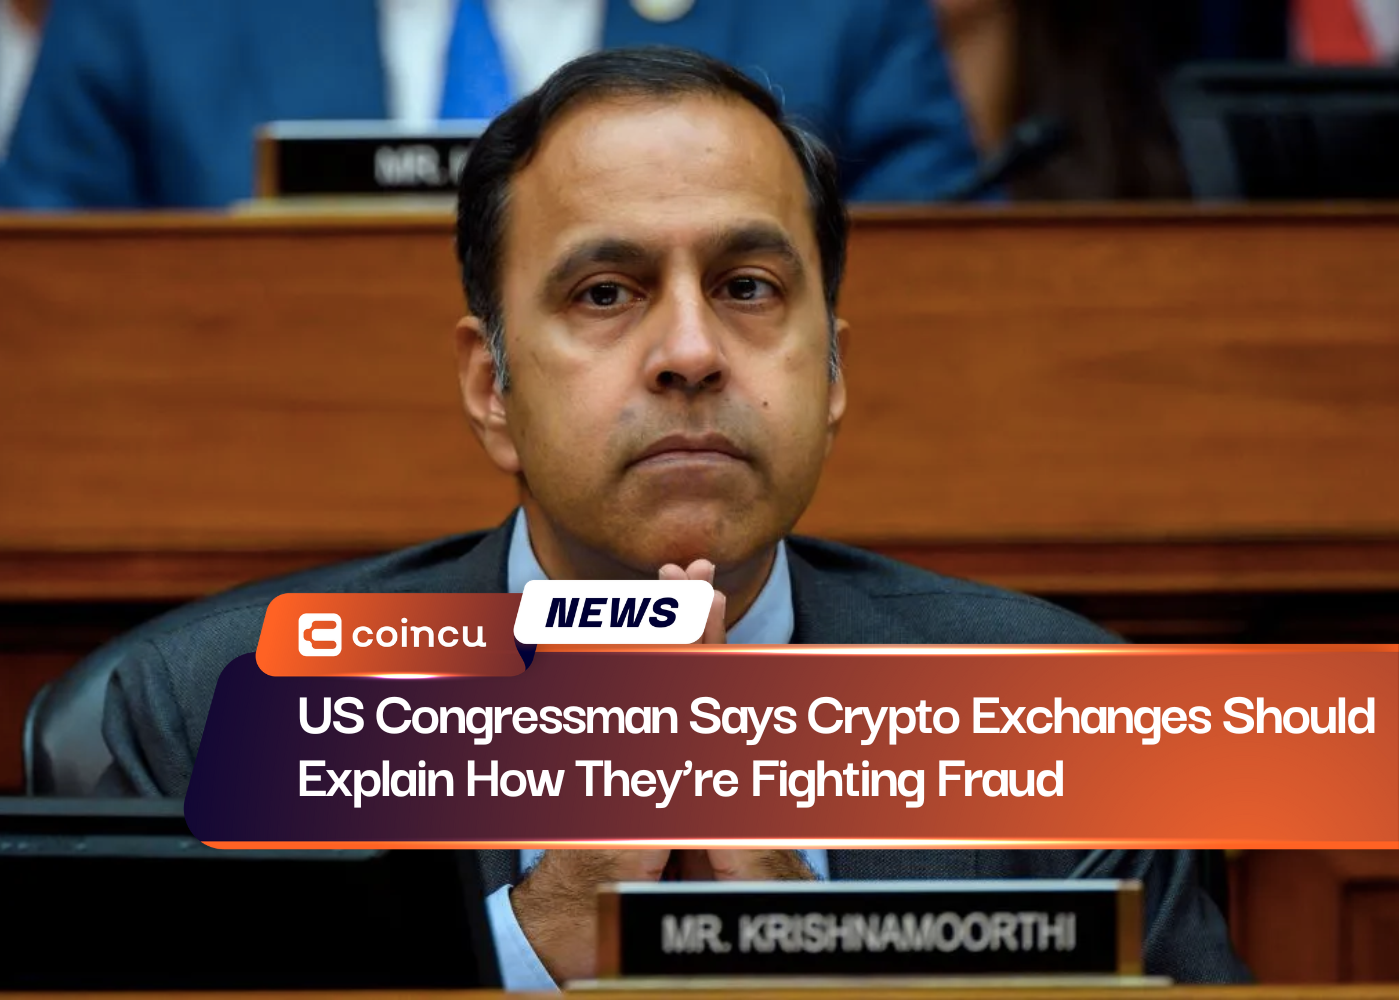 US Congressman Says Crypto Exchanges Should Explain How They’re Fighting Fraud